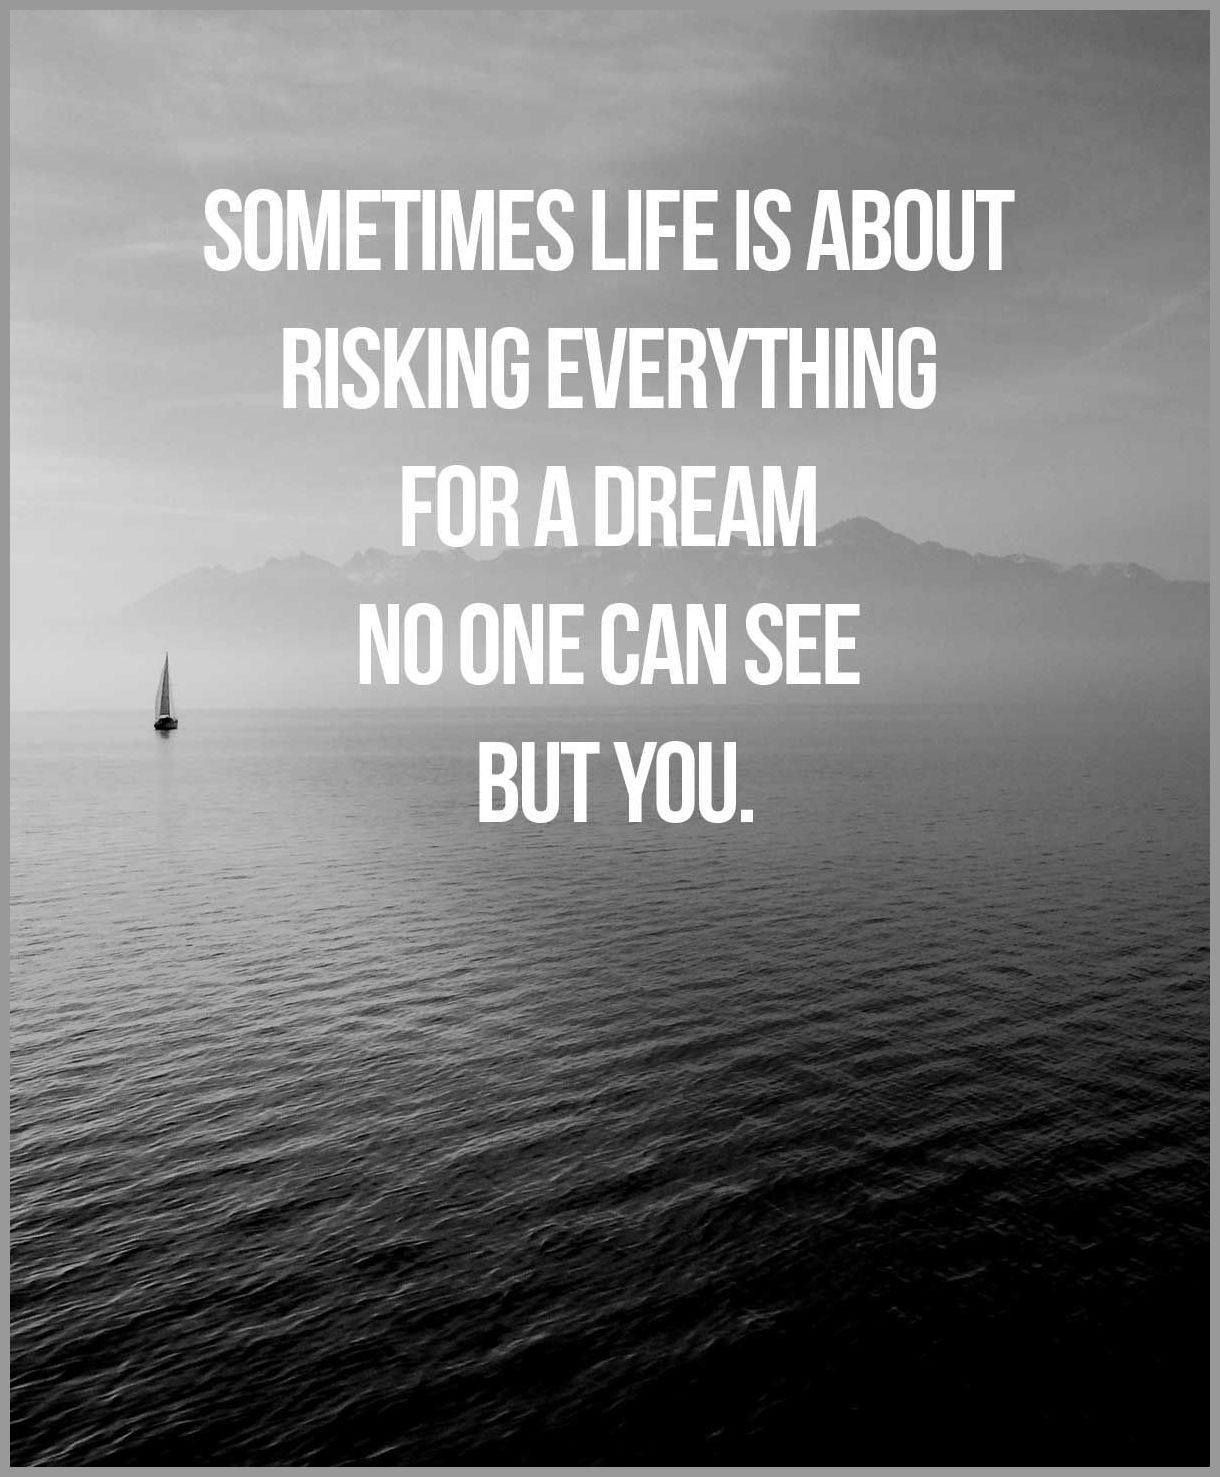 Sometimes life is about risking everything for a dream no one can see but you